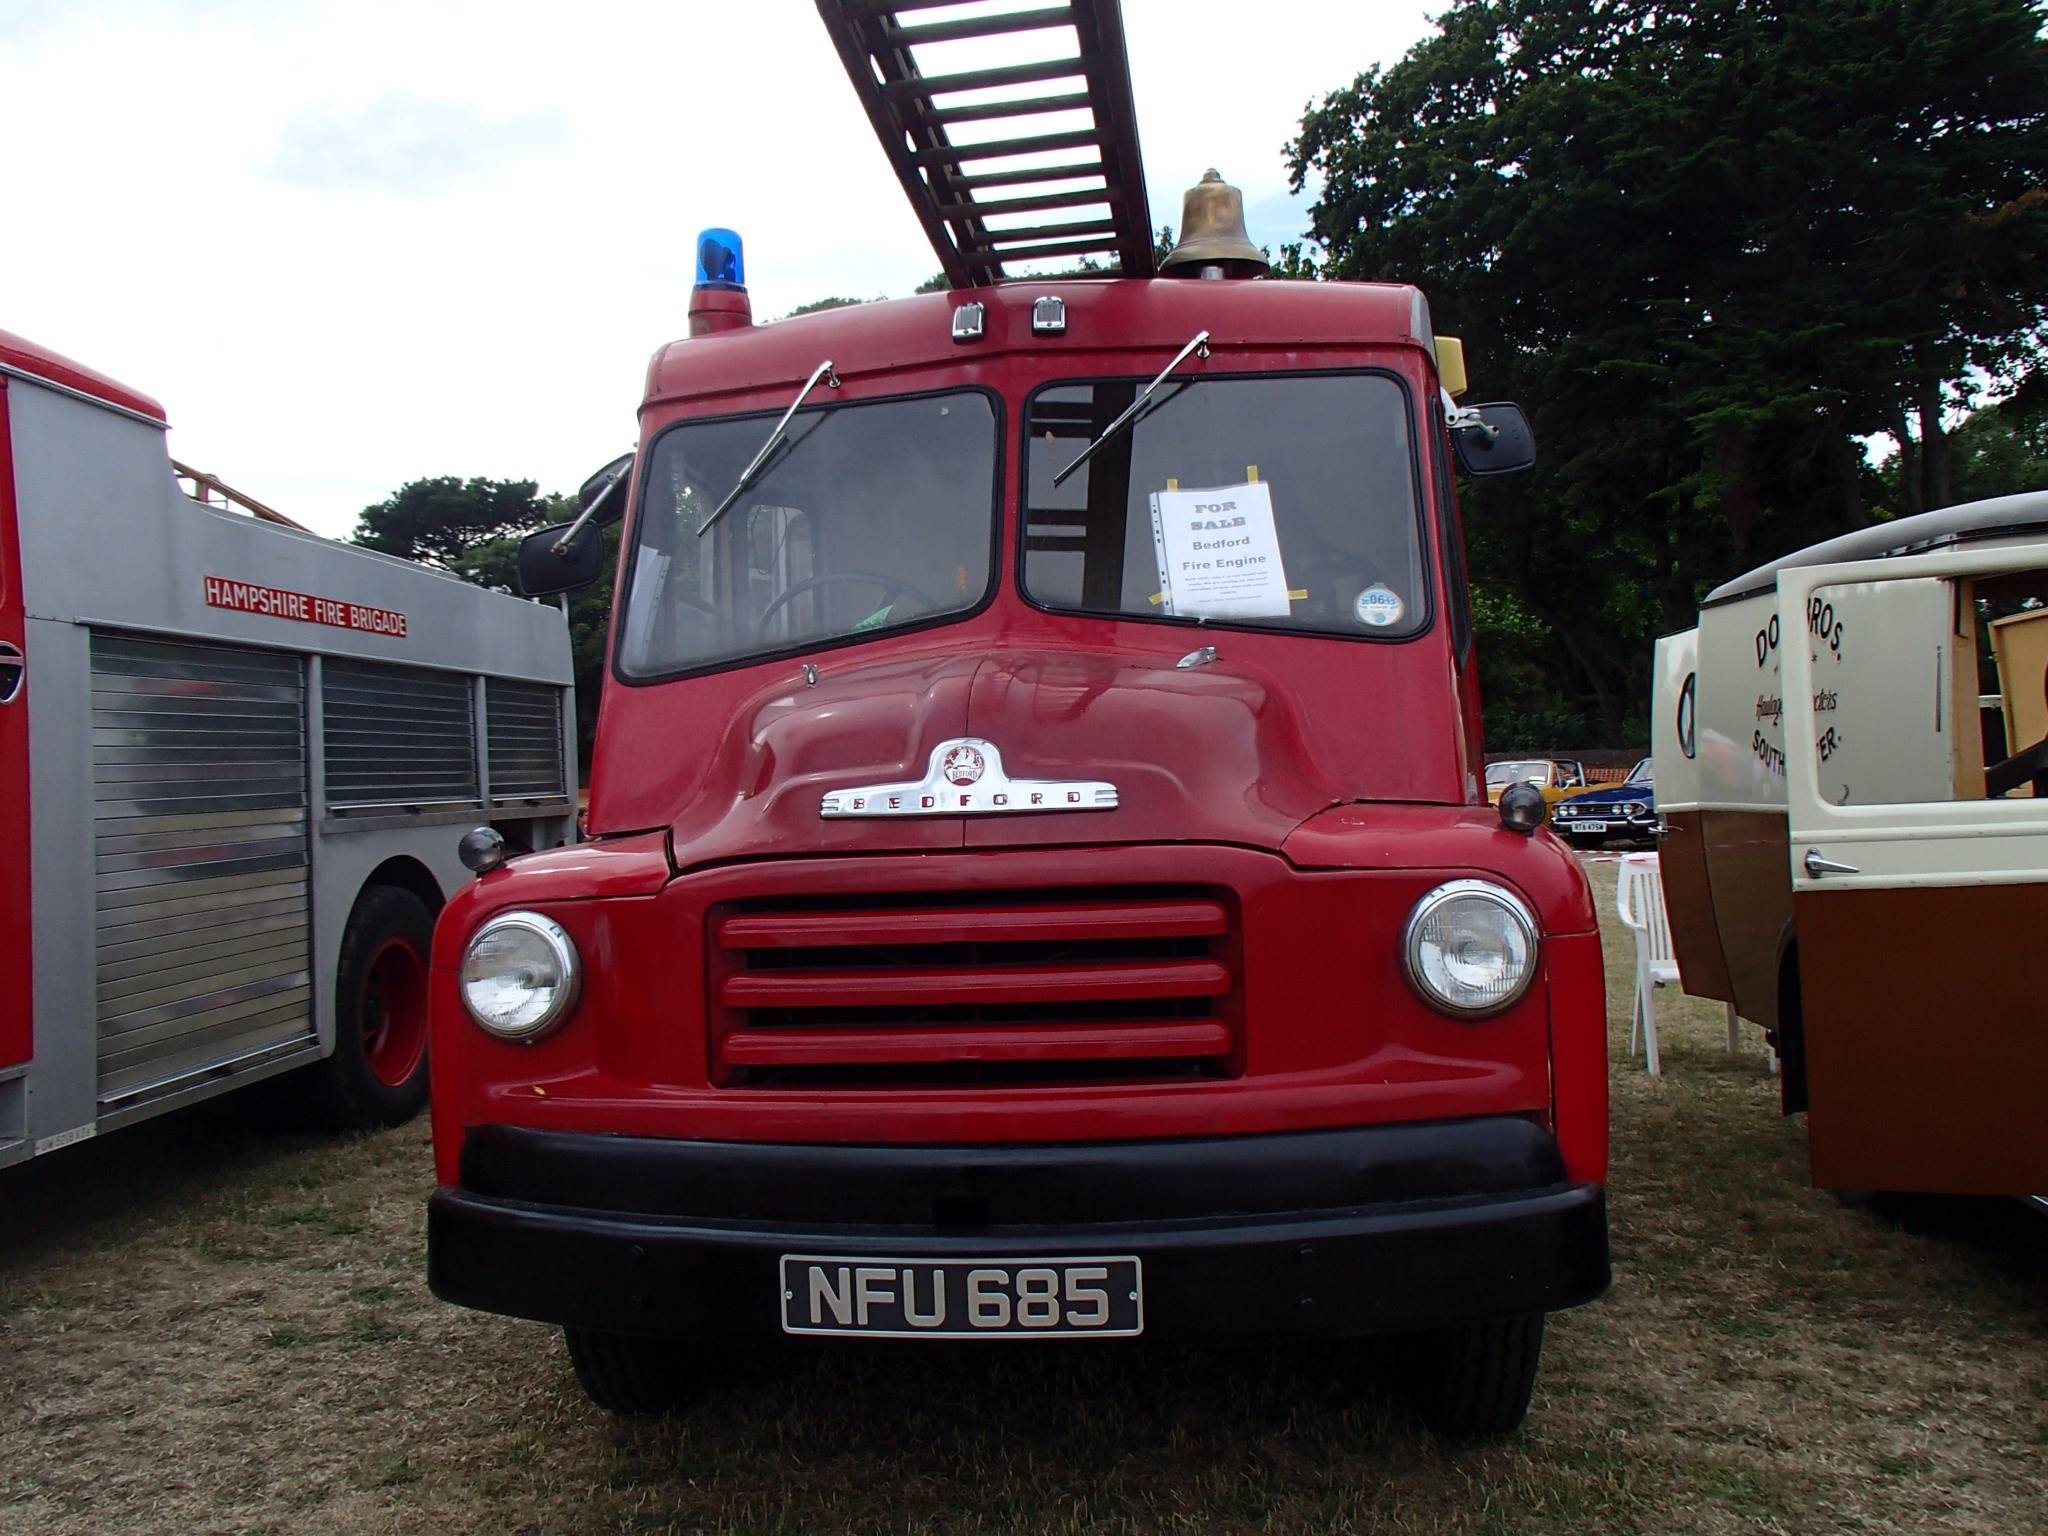 1955-fire-truck-only-5-build-21